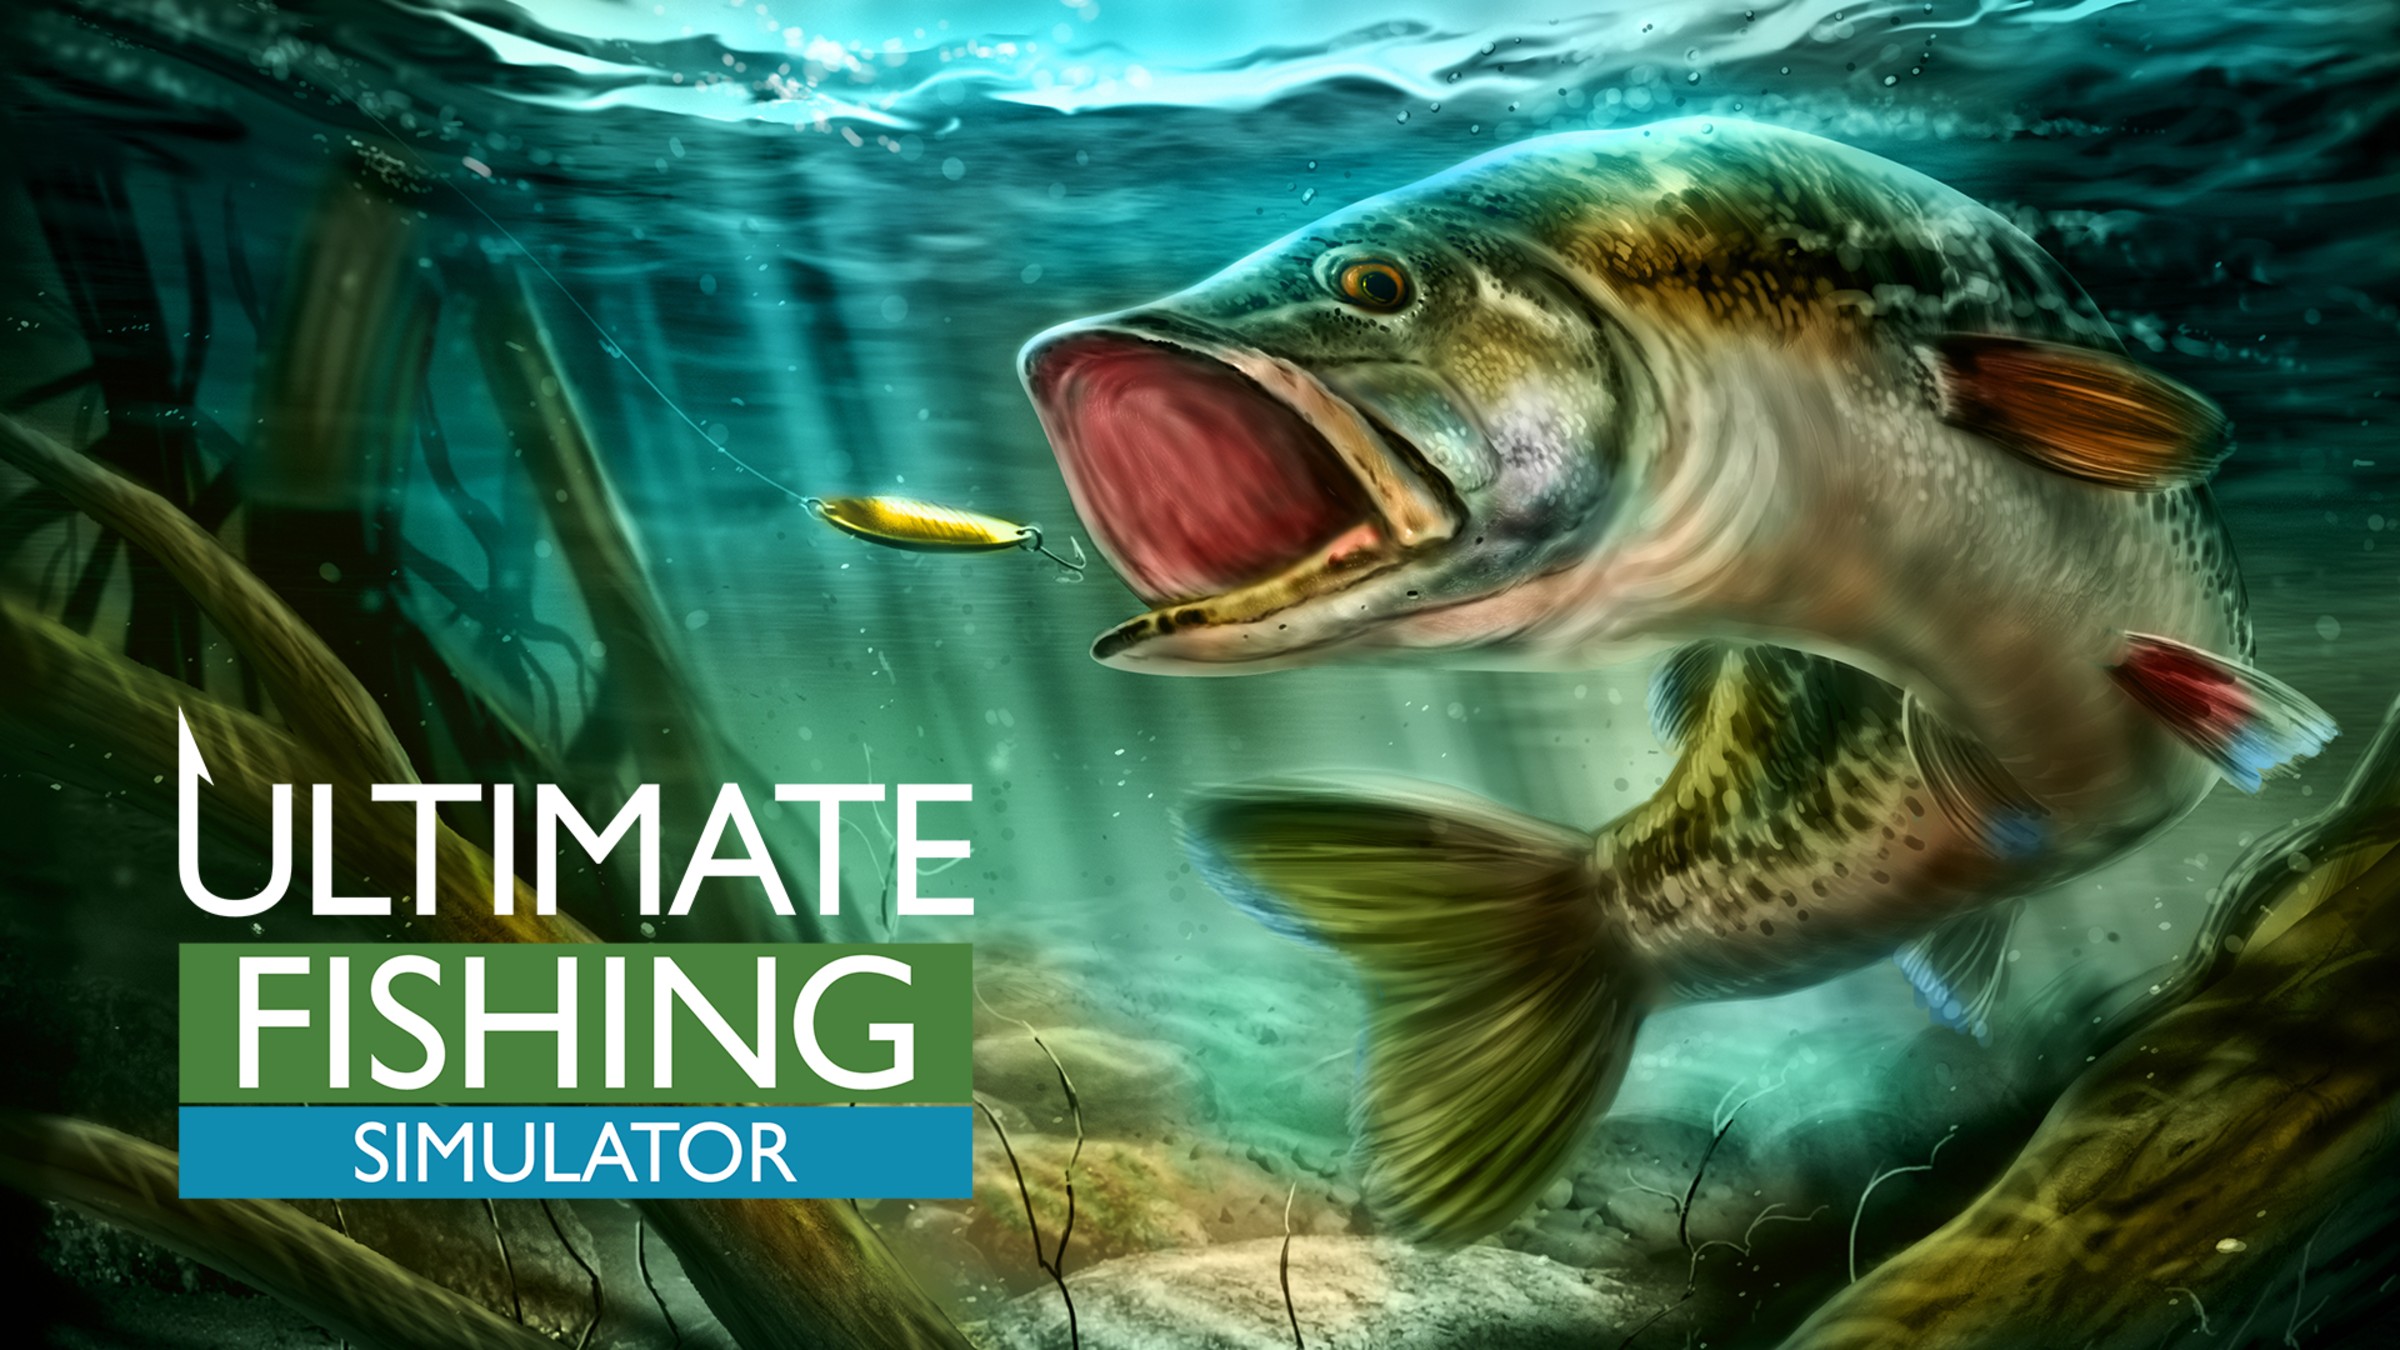 Ultimate Fishing Simulator for Nintendo Switch - Nintendo Official